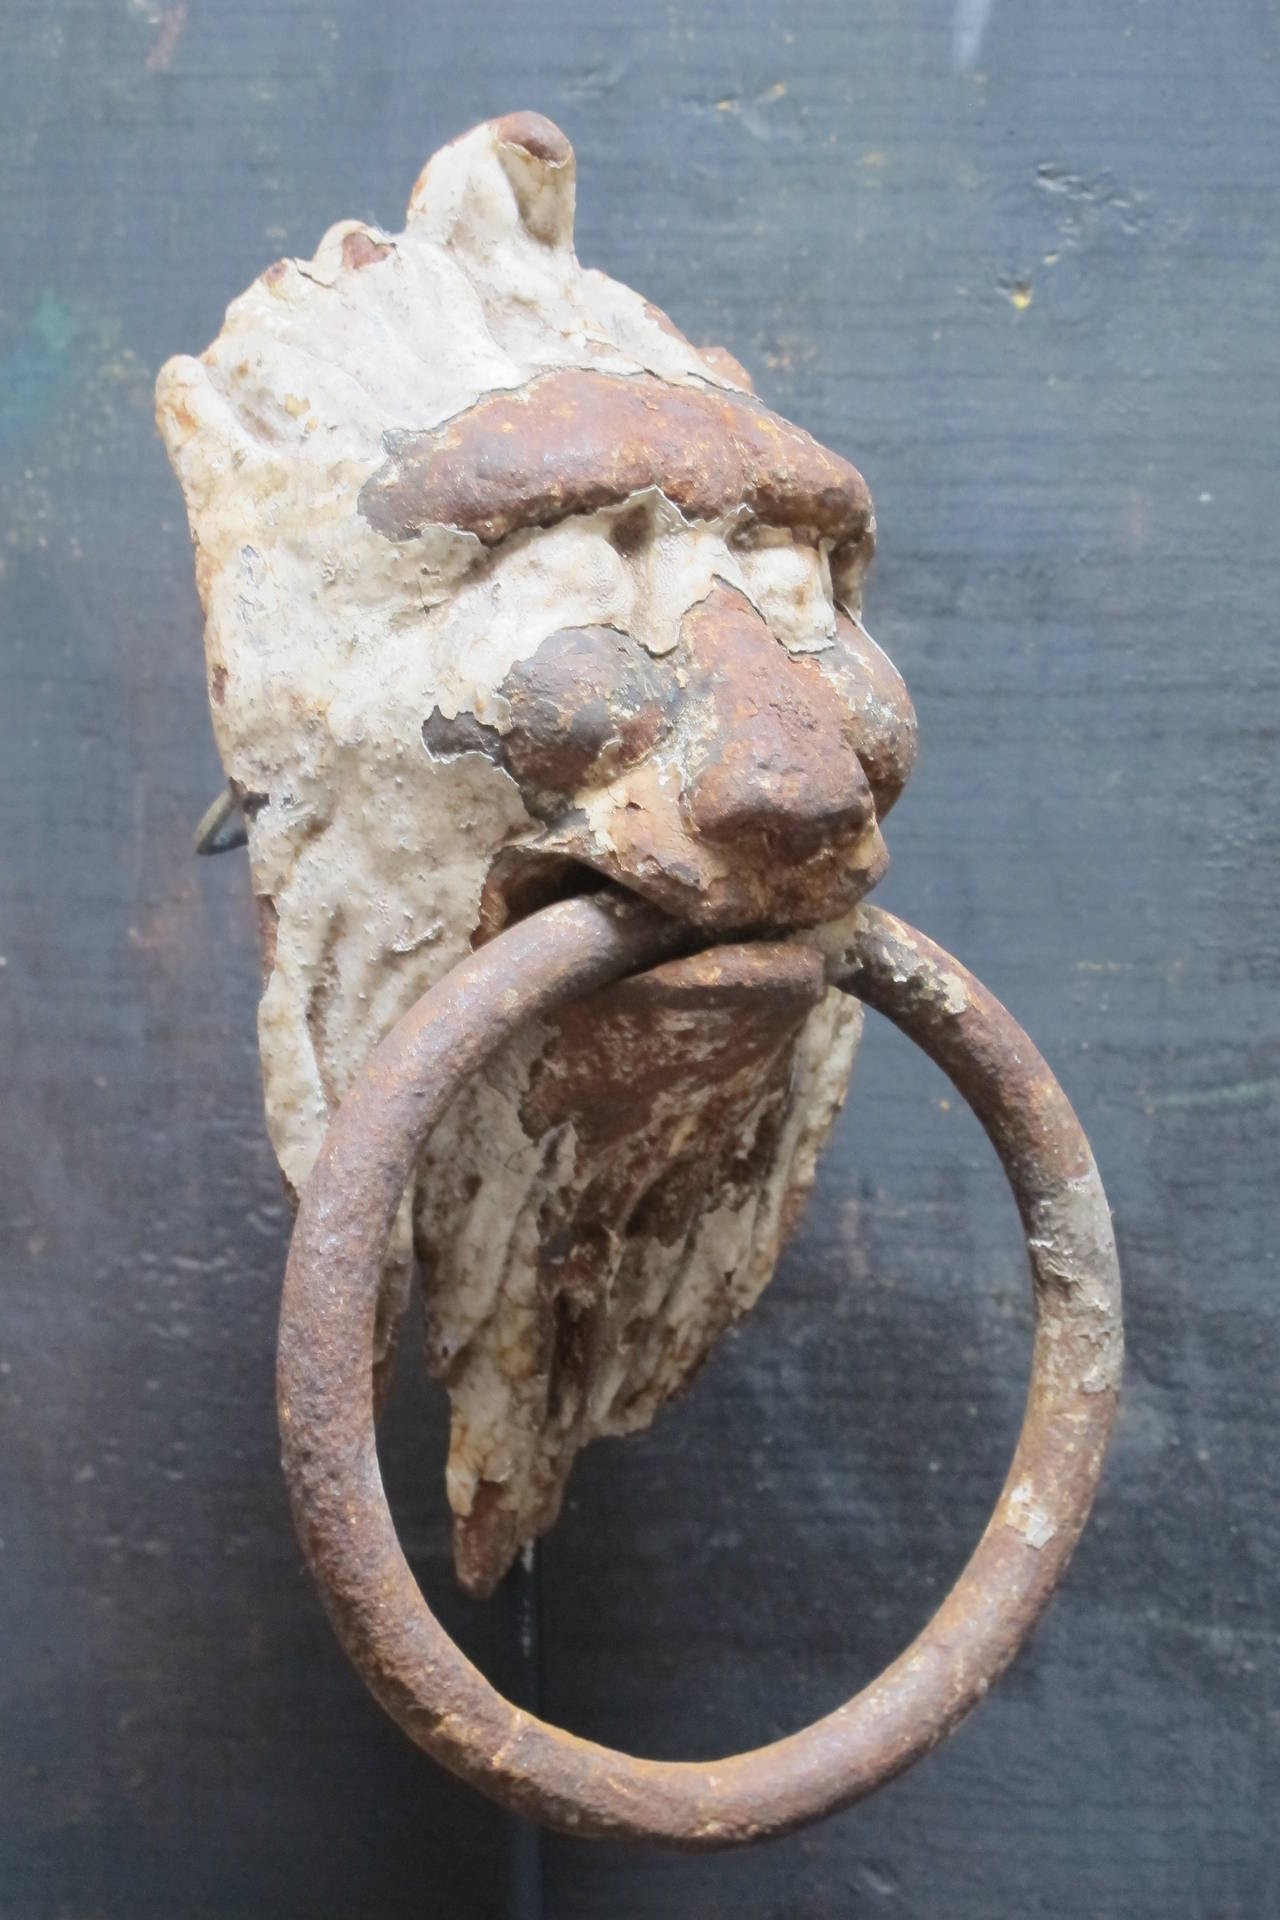 Old cast iron door knocker with remains of old paint (removable) and iron ring knocker. Can be mounted on a door or displayed on its black metal stand.
Dimensions: Height on base is 12 inches, 19th century.